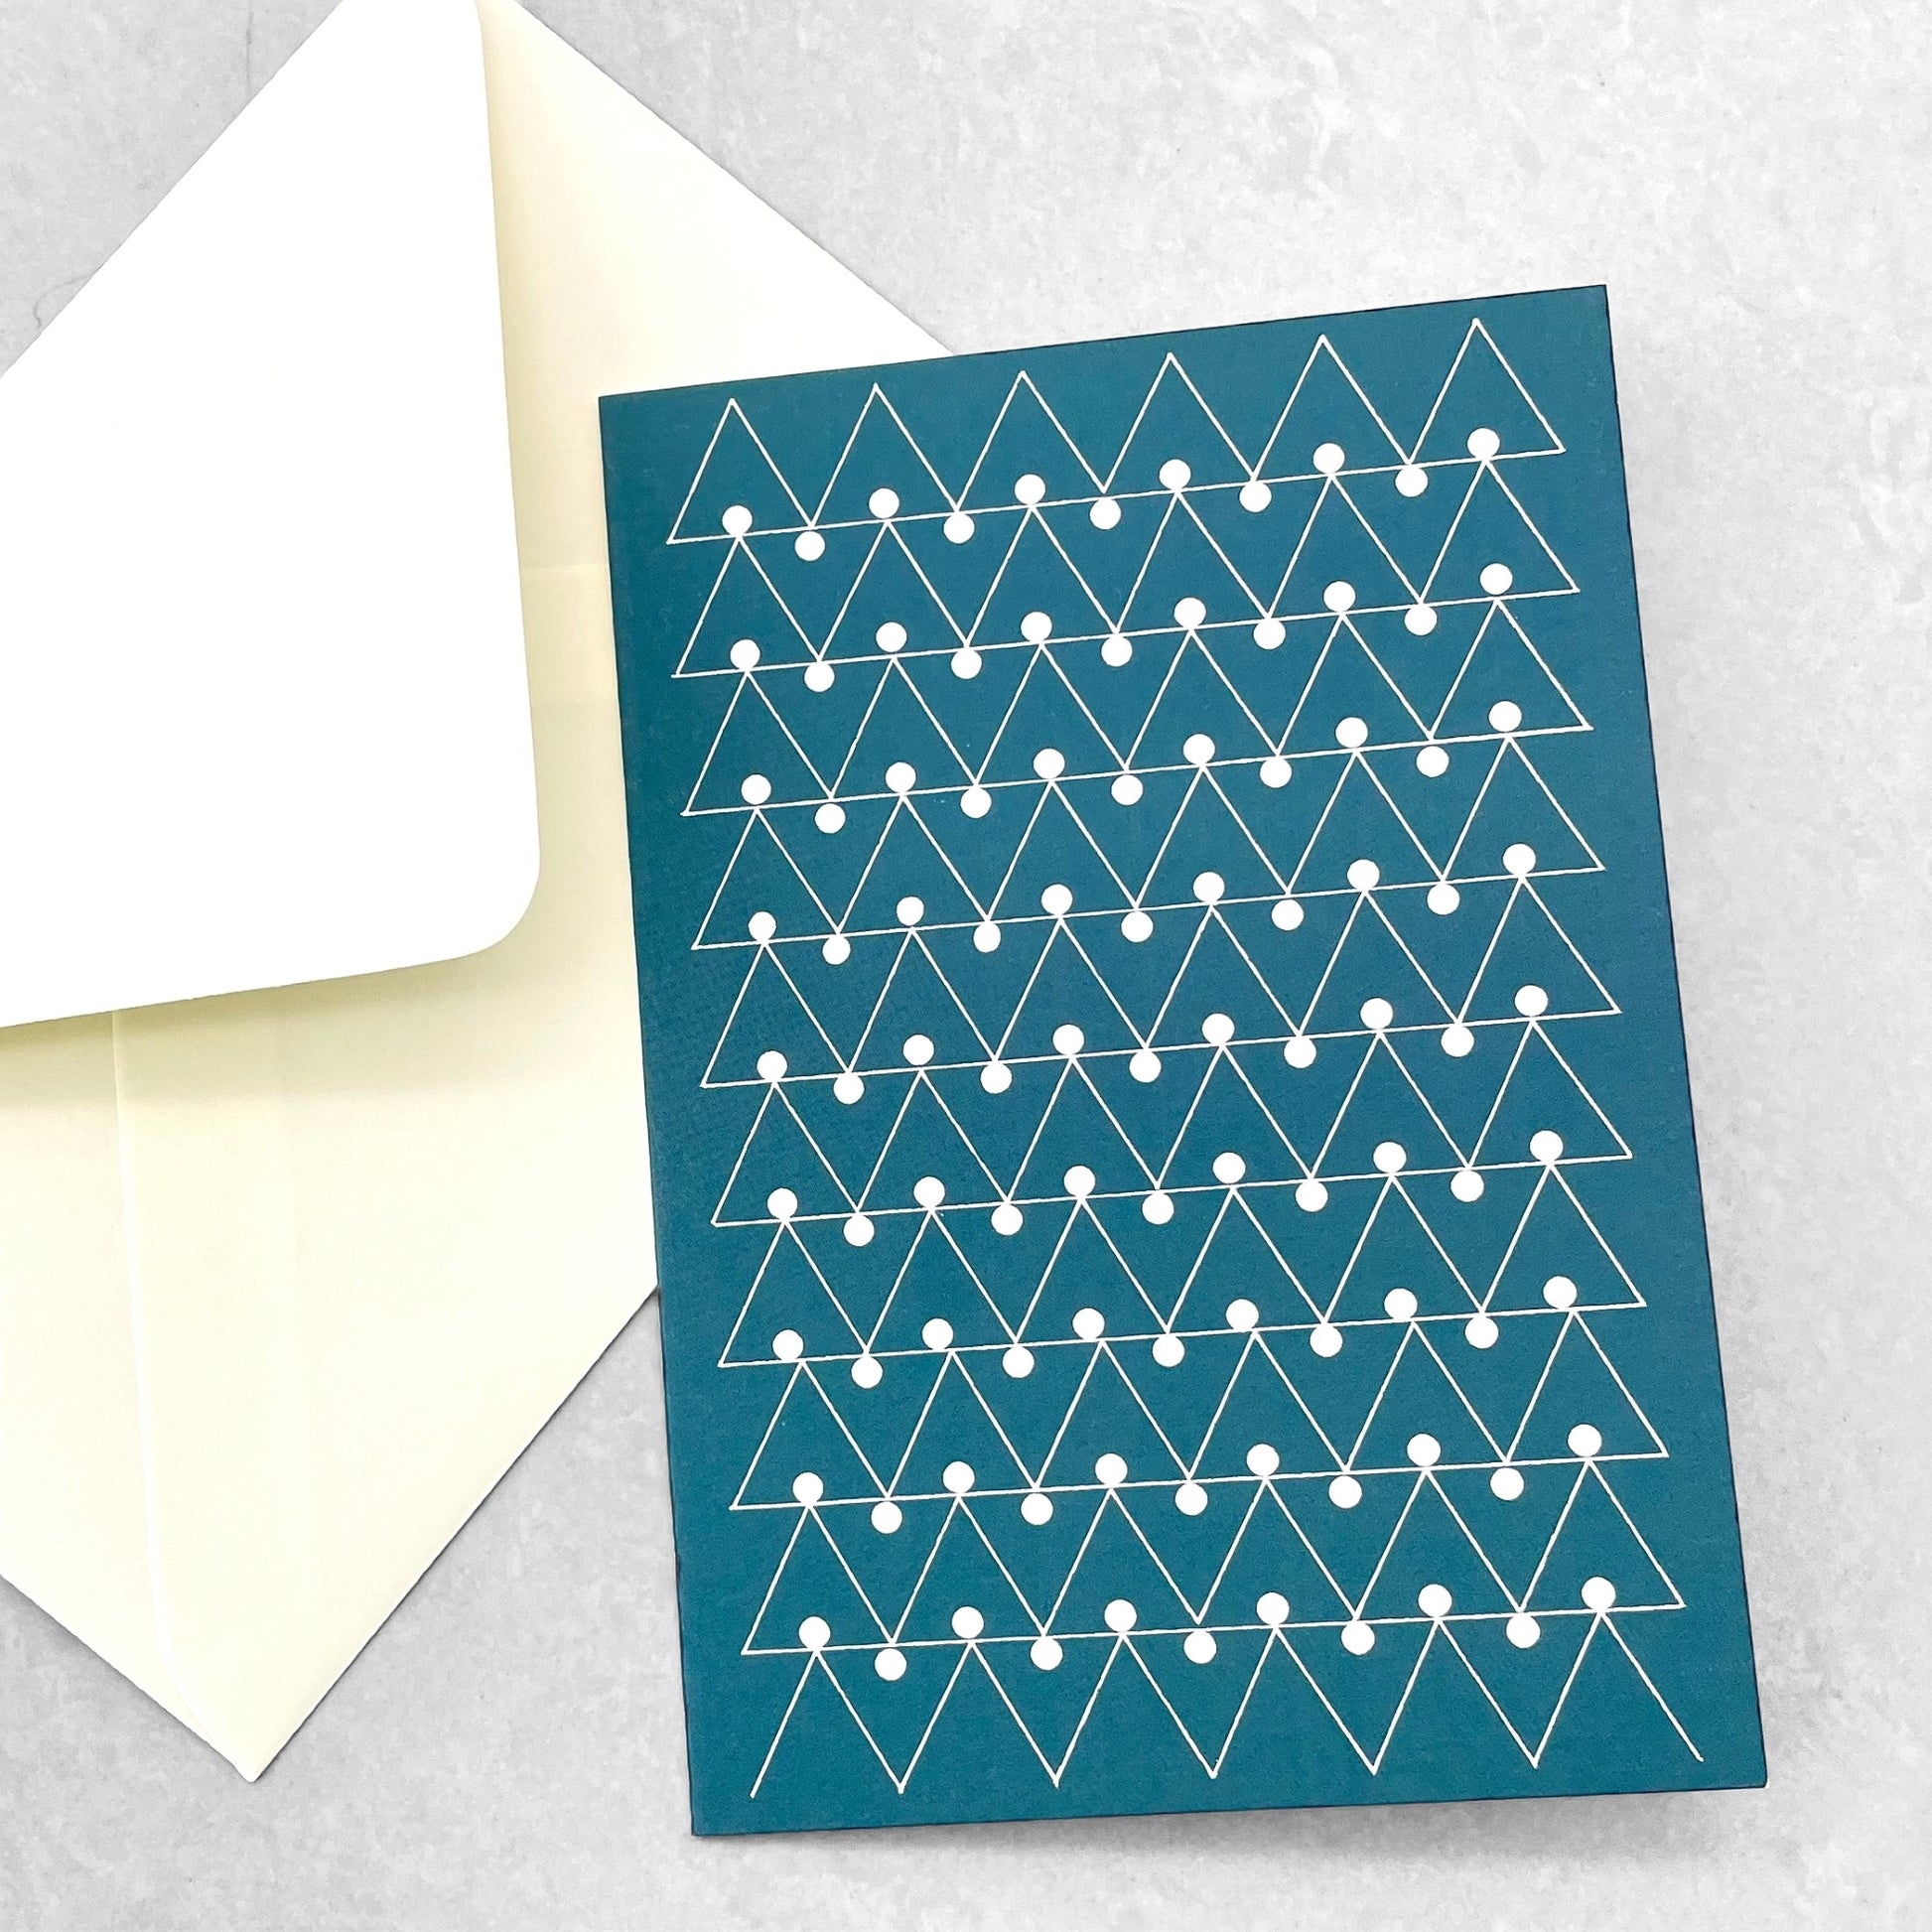 Greetings card by Ola Studio with a triangular geometric design in white on a deep teal background, with envelope